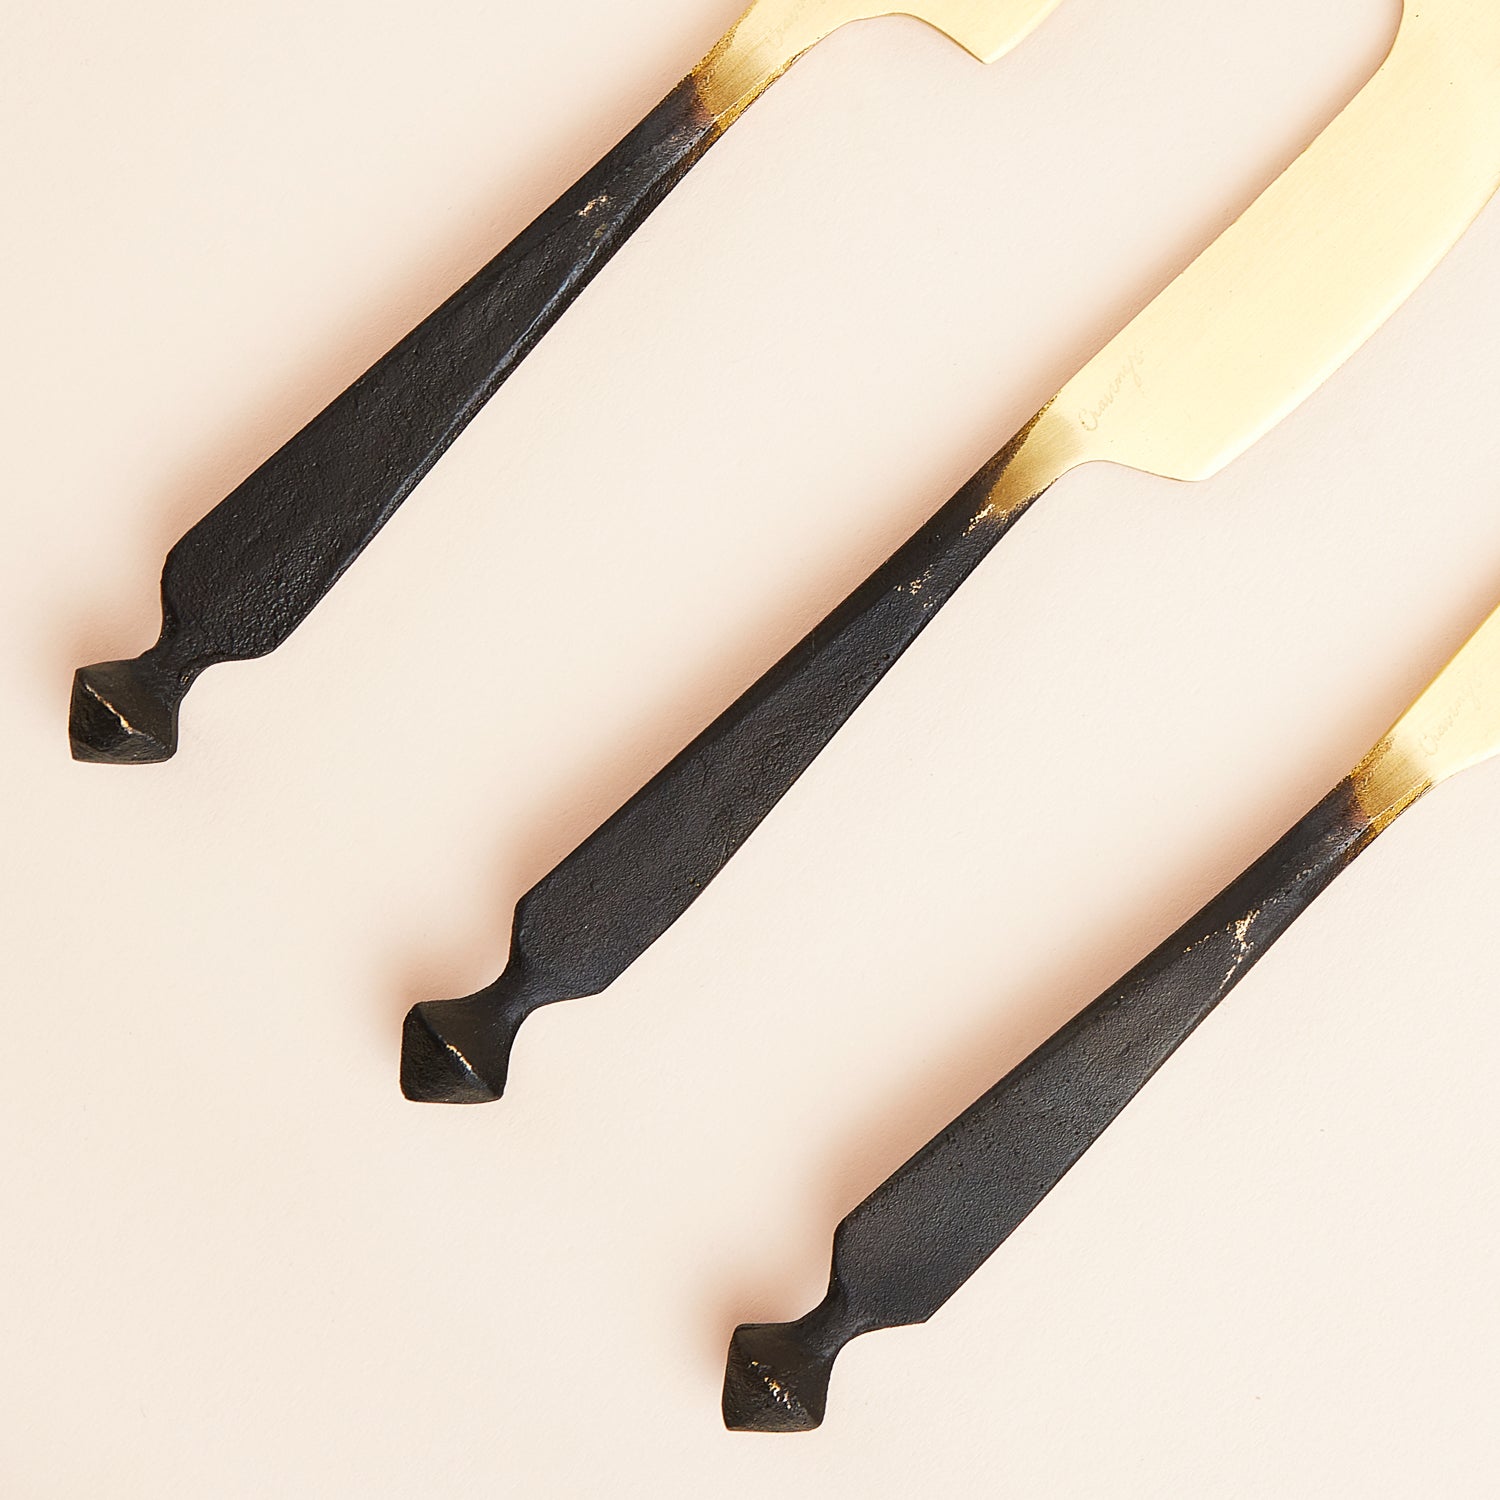 The Show-Off Cheese Knife Set